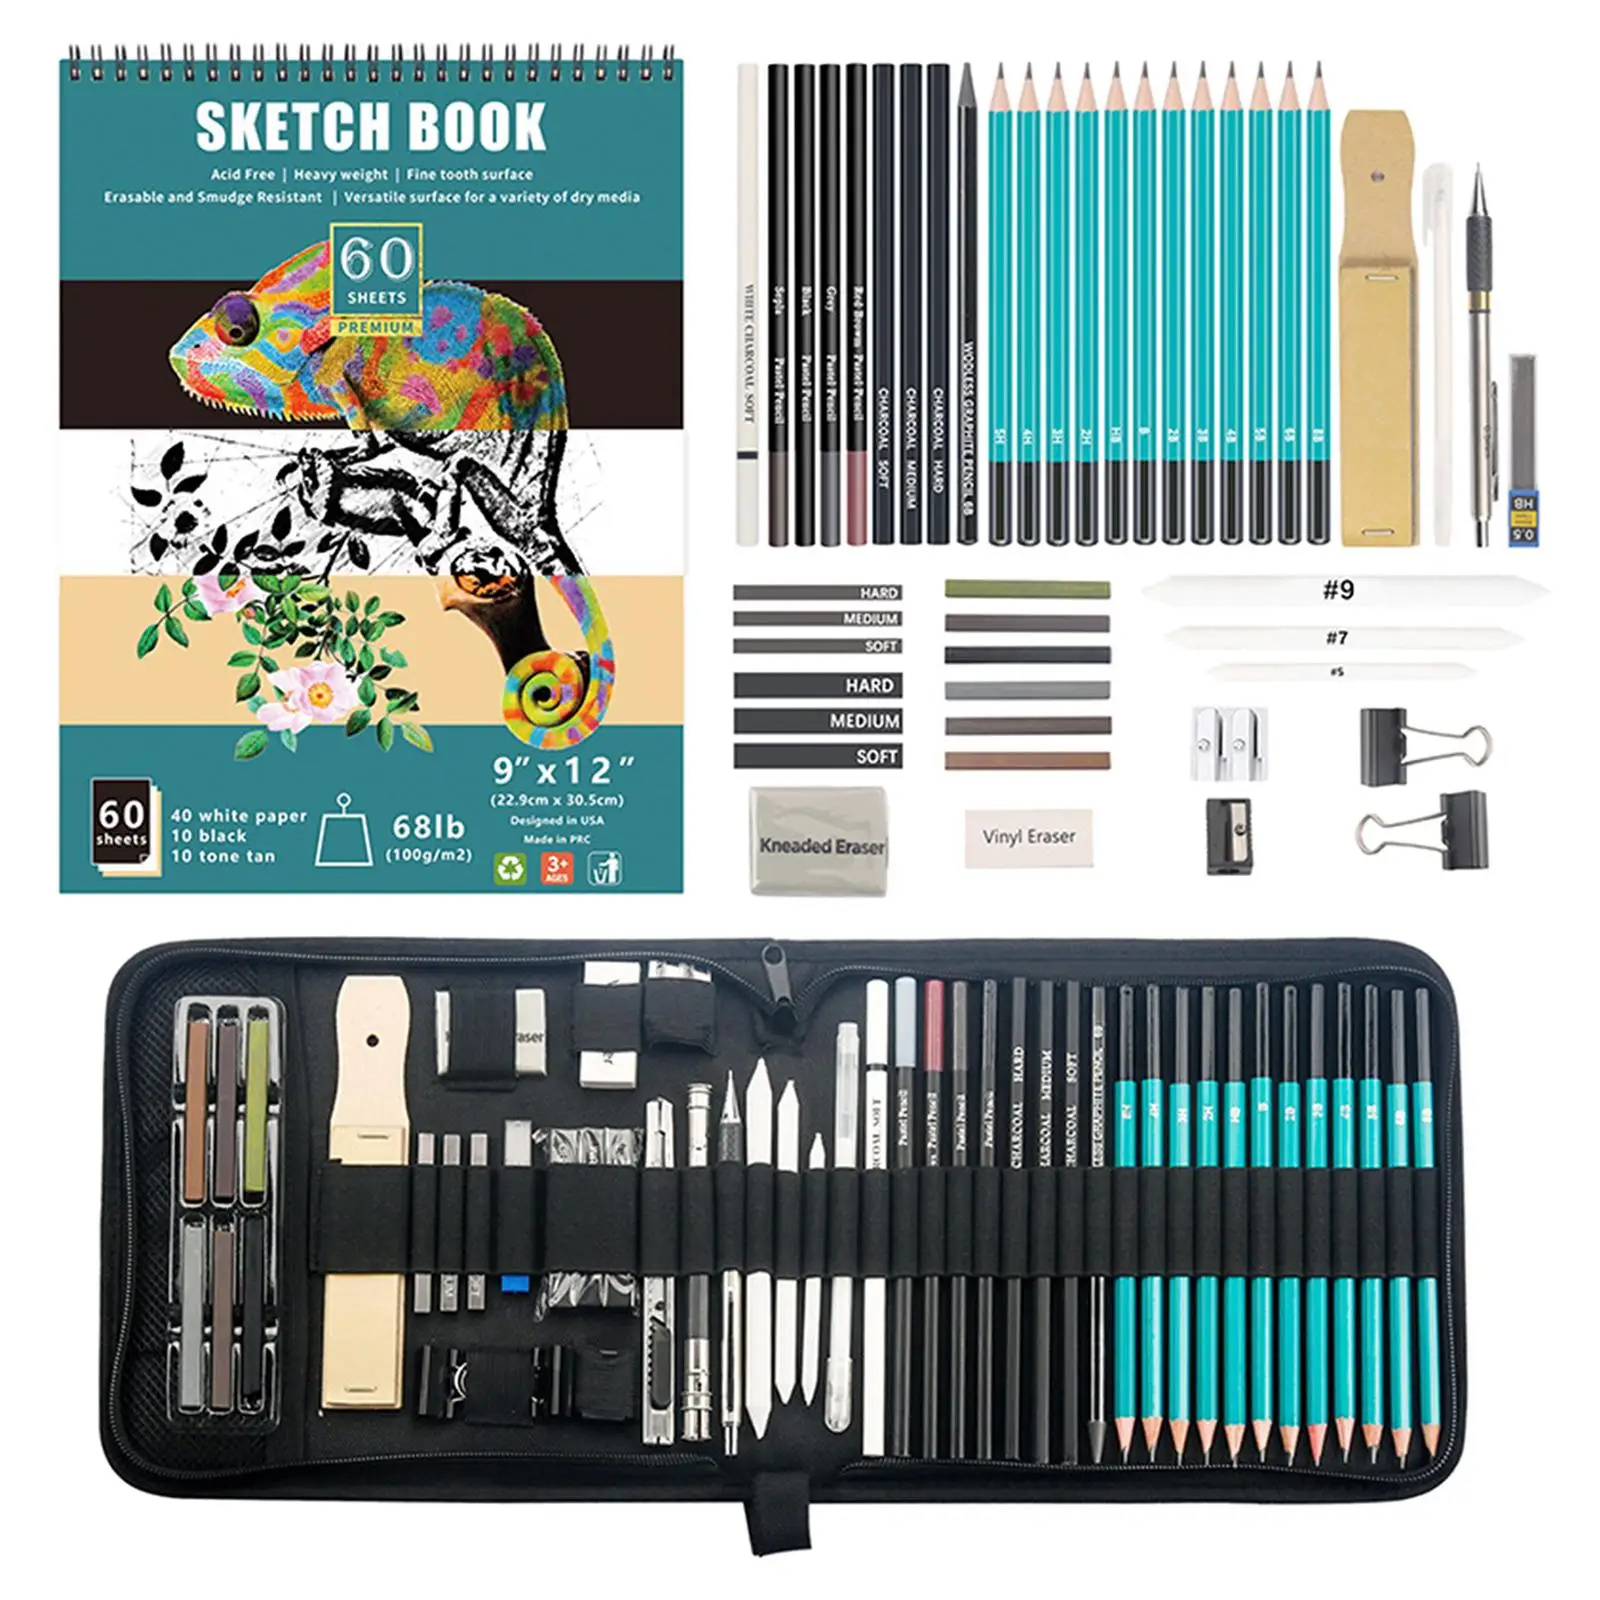 12 Sketching Pencil Set Graphite Pencils Art Tools Charcoal Sketch Kit School 100 Page Drawing Pad Painting Kit for Artist